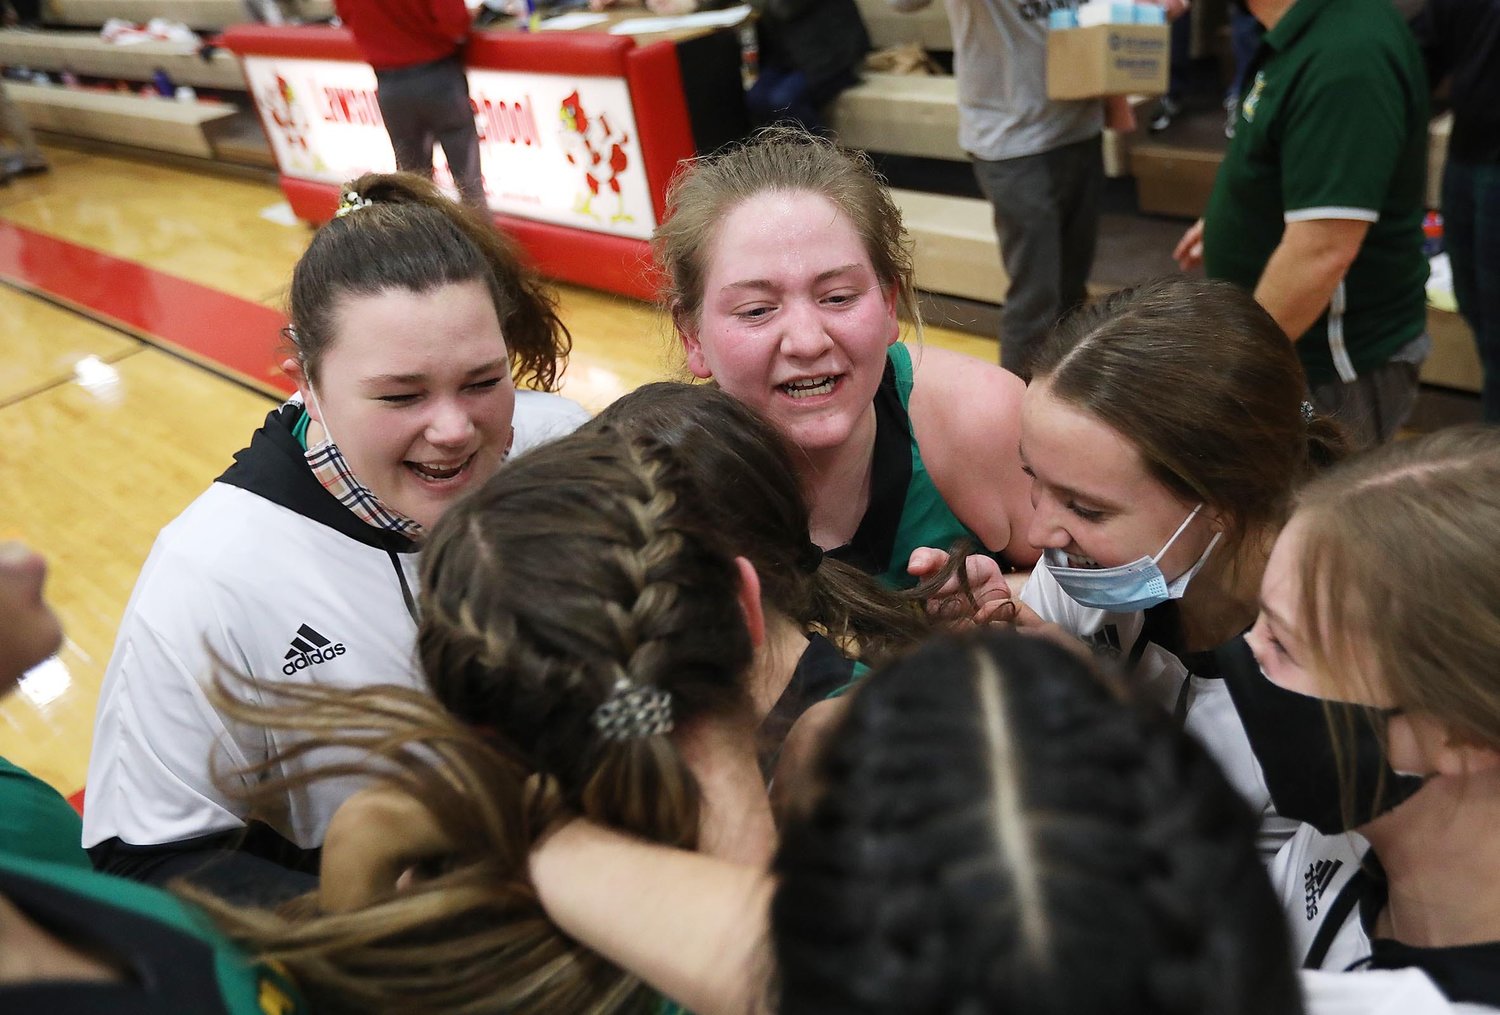 Milan reacts after defeating Lawson 54-42 Wednesday evening during Sectional Basketball at Lawson High School.